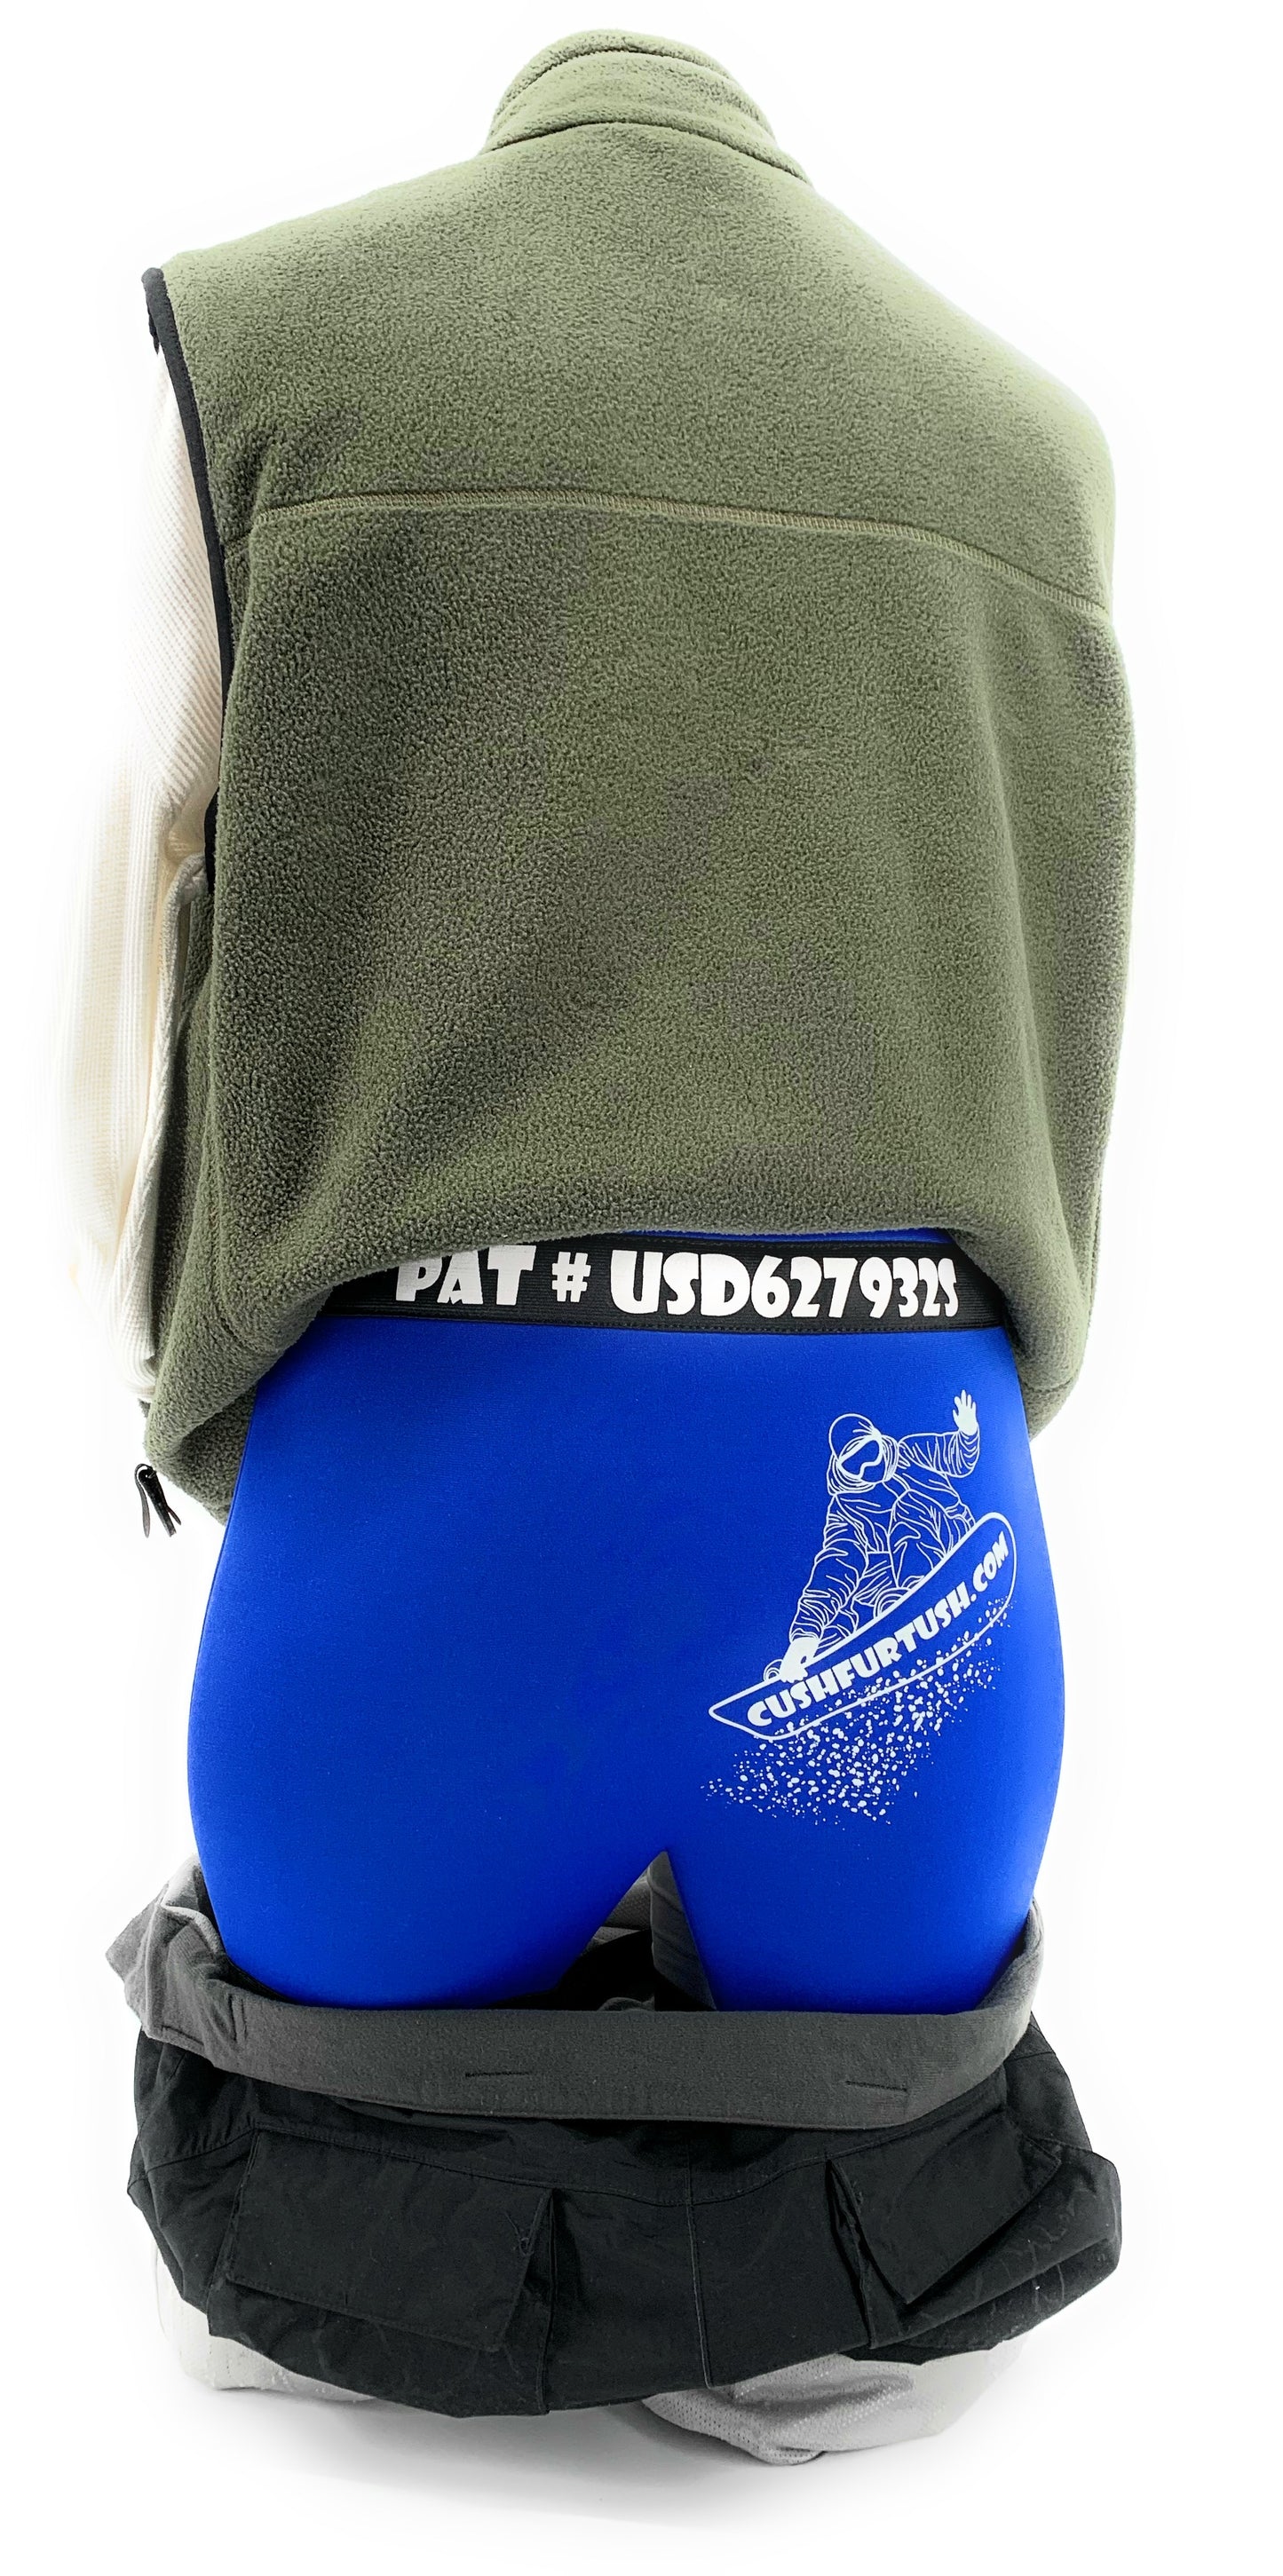 Padded Shorts Butt Pads for Youth Men and Women Ideal for Snowboarding Skiing Bicycling Skateboarding Skating Ice Skating